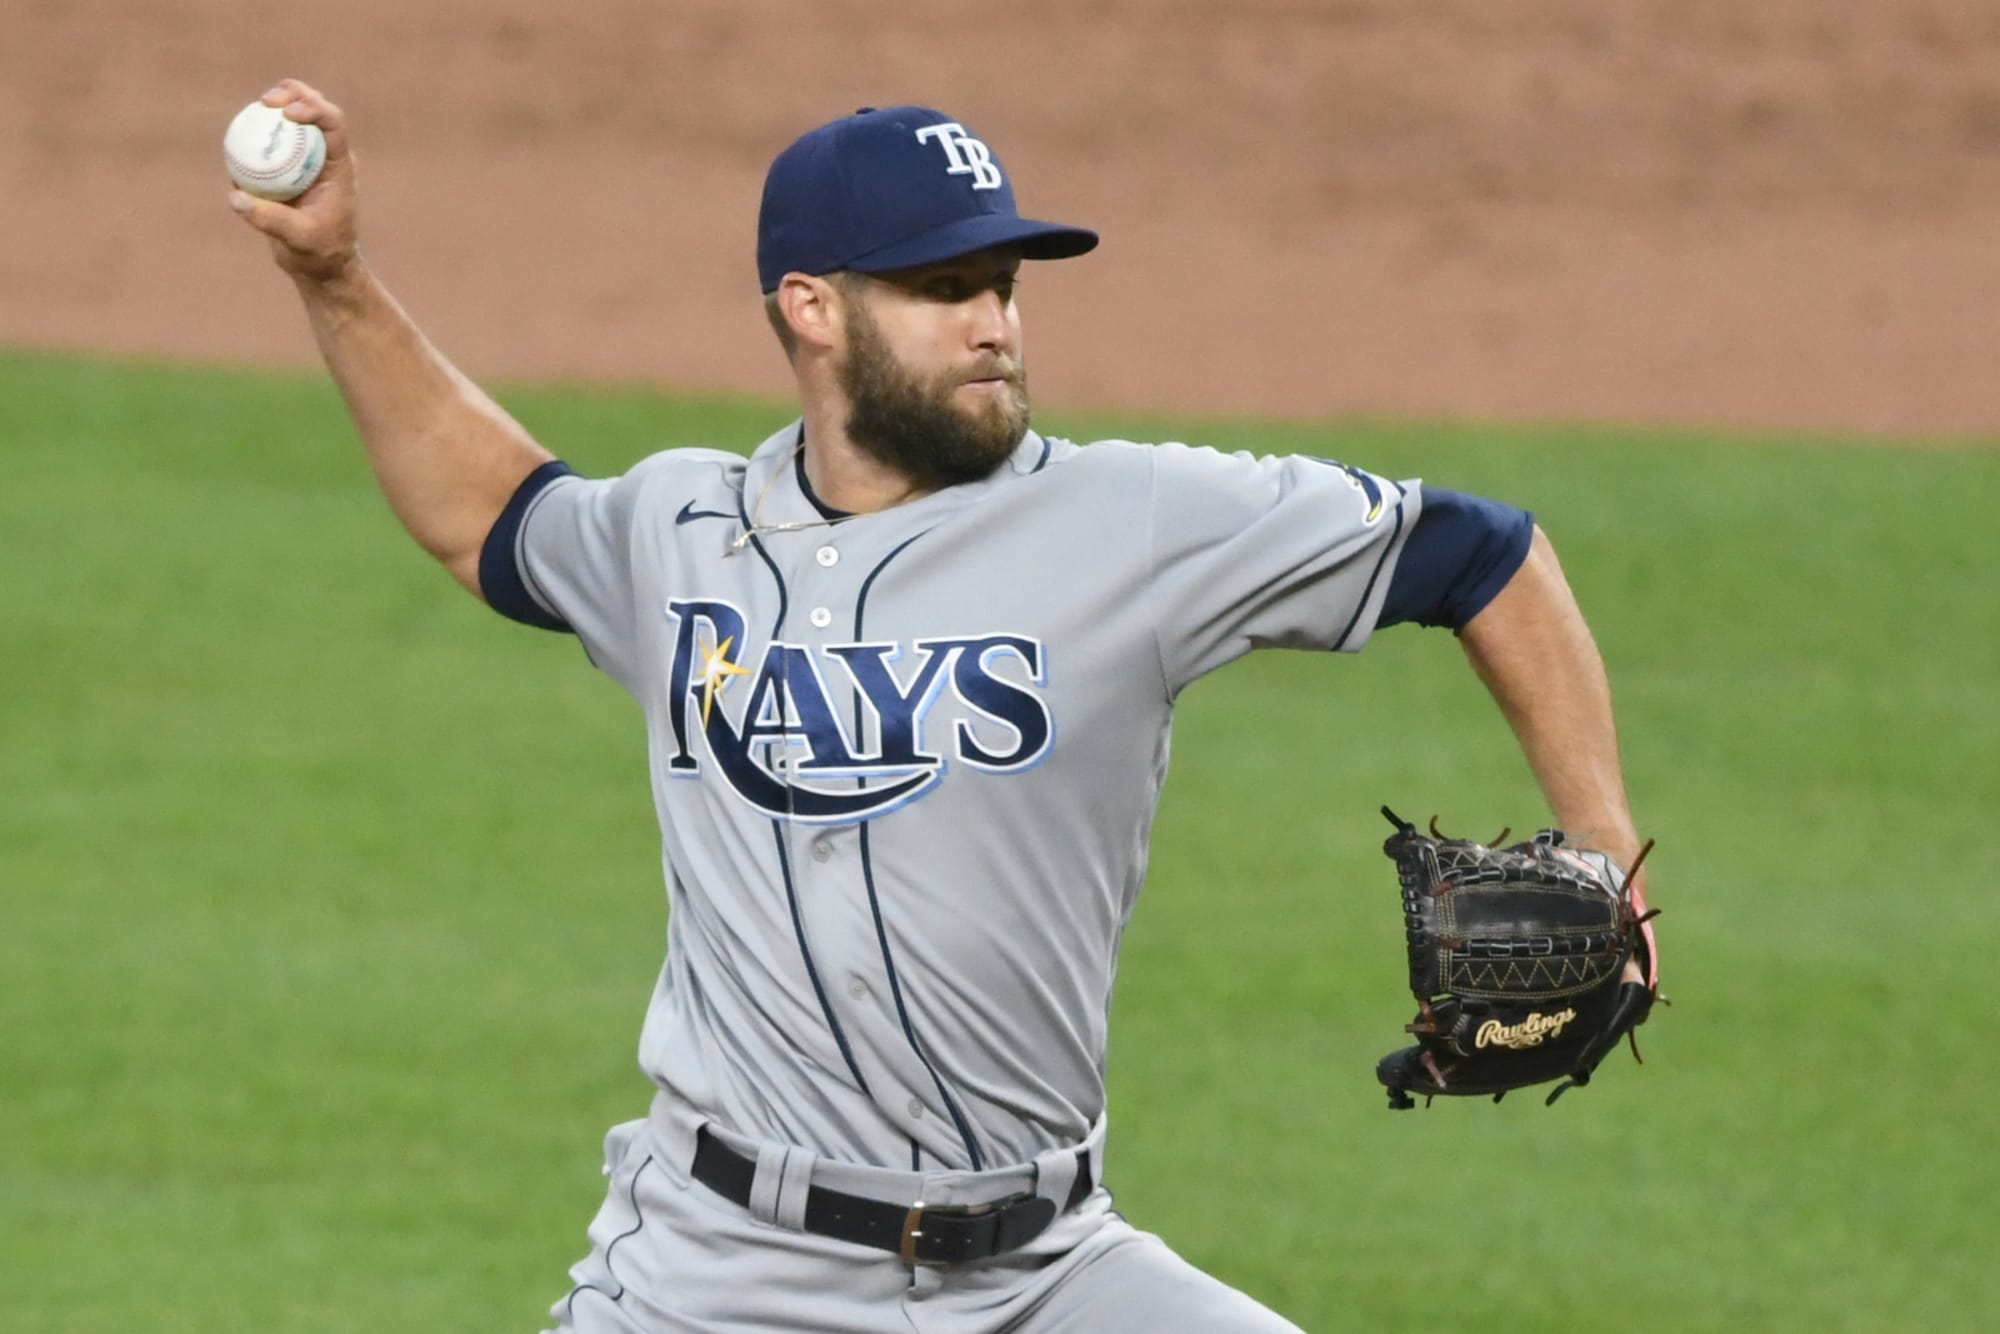 Yankees steal reliever from Rays thanks to Tampa Bay roster crunch